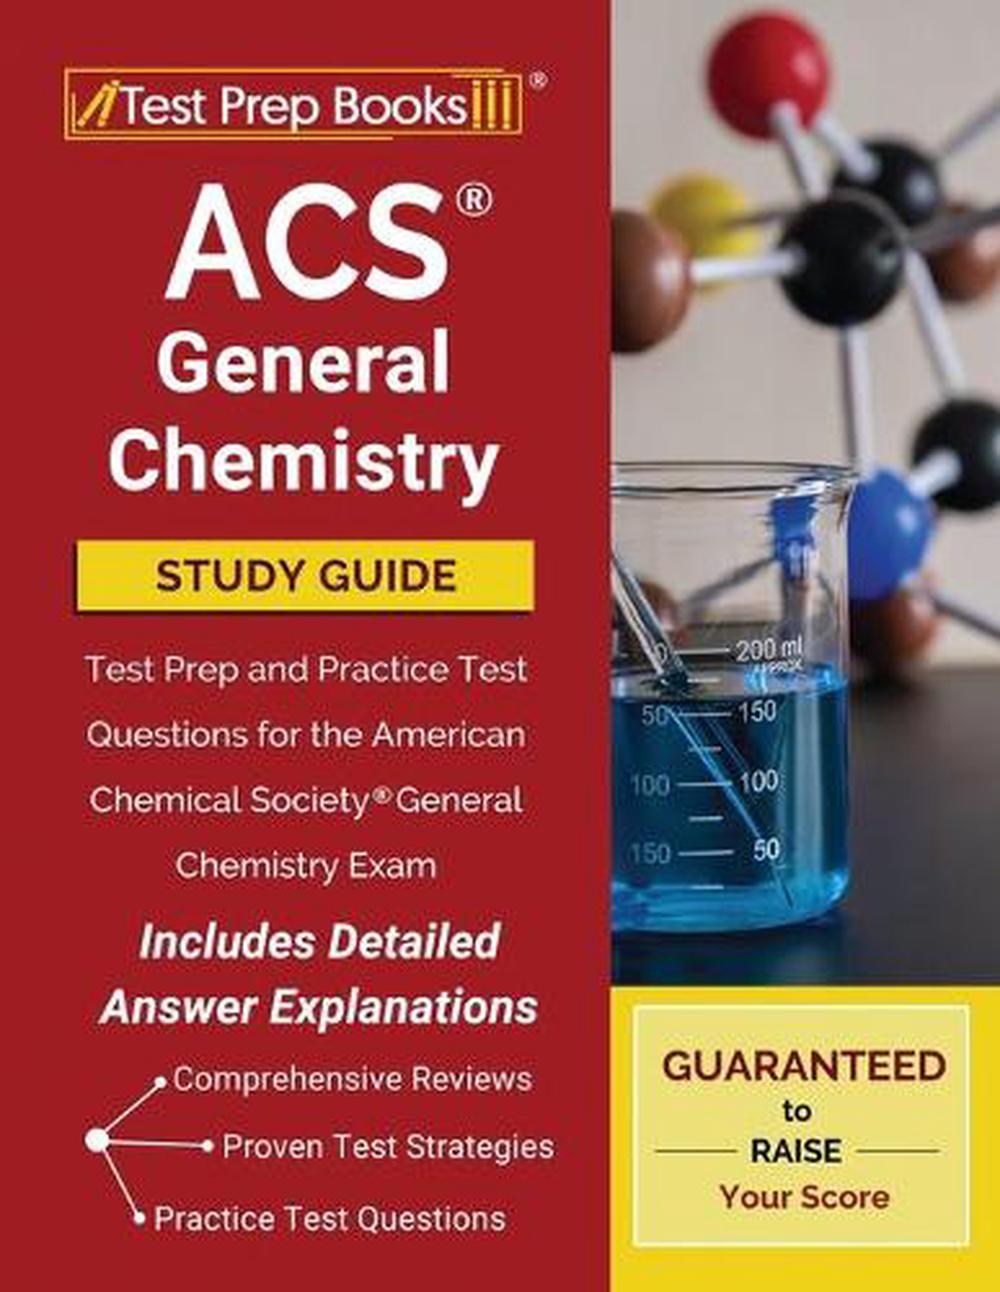 Acs General Chemistry Study Guide by Tpb Publishing (English) Paperback